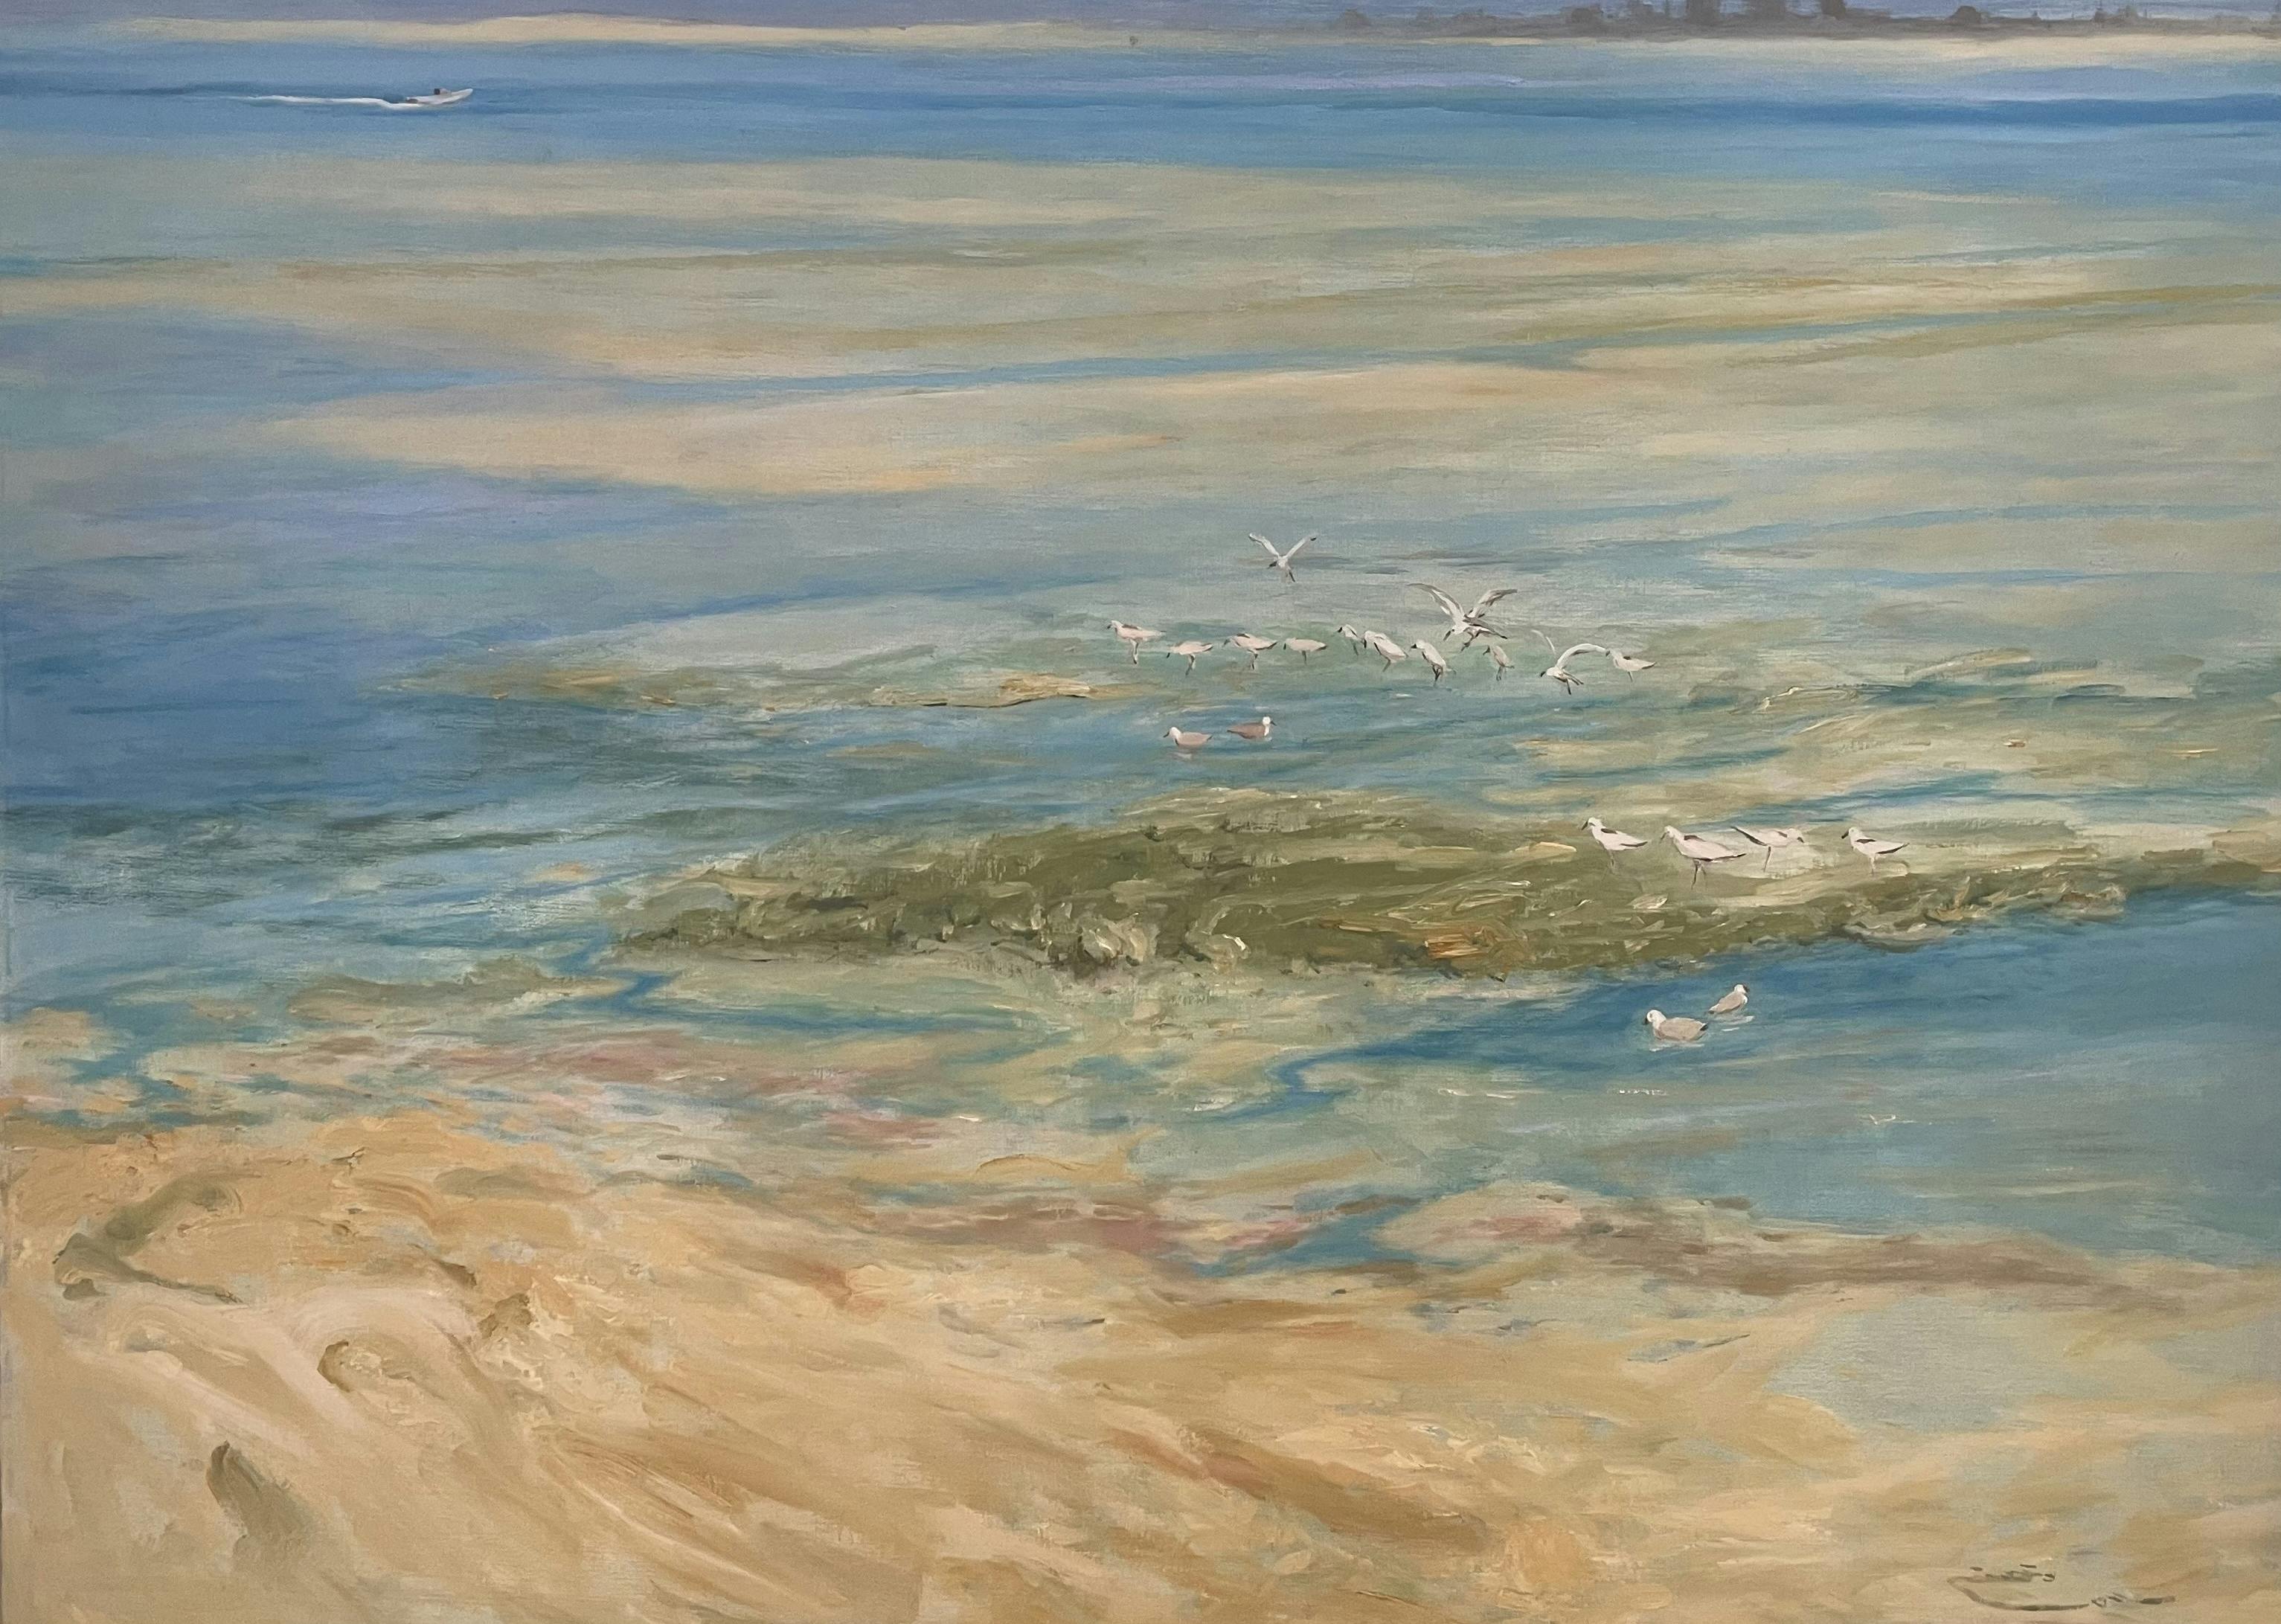 Sea by Sitra, 2008-2011, Oil on canvas, 82 x 96 cm